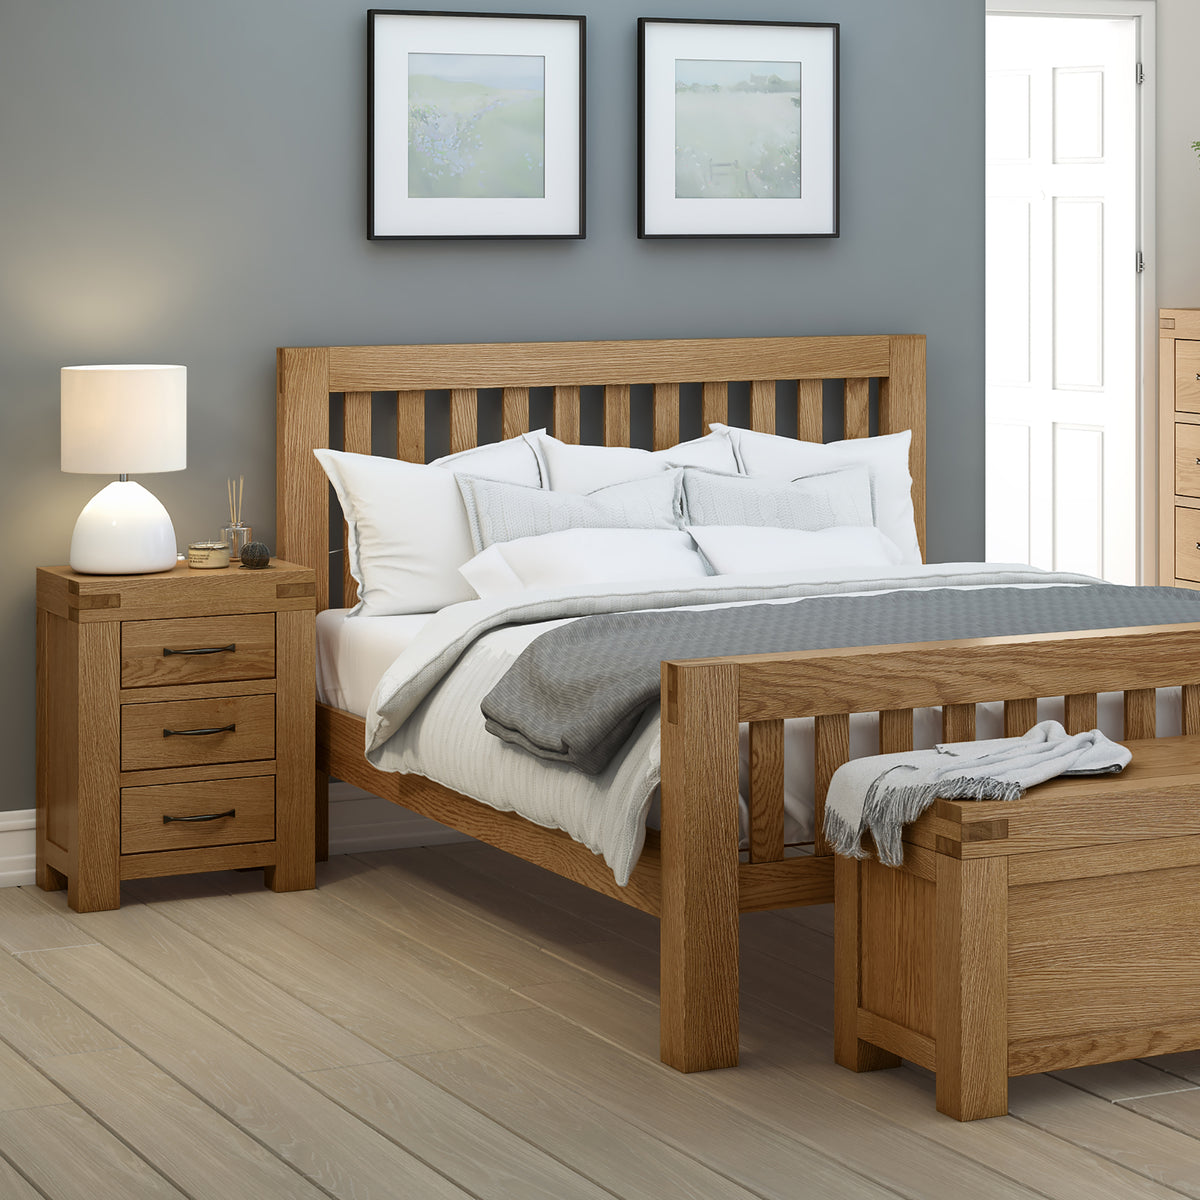 The Abbey Grande Wooden Oak Bed Frame Double or King Size - Lifestyle